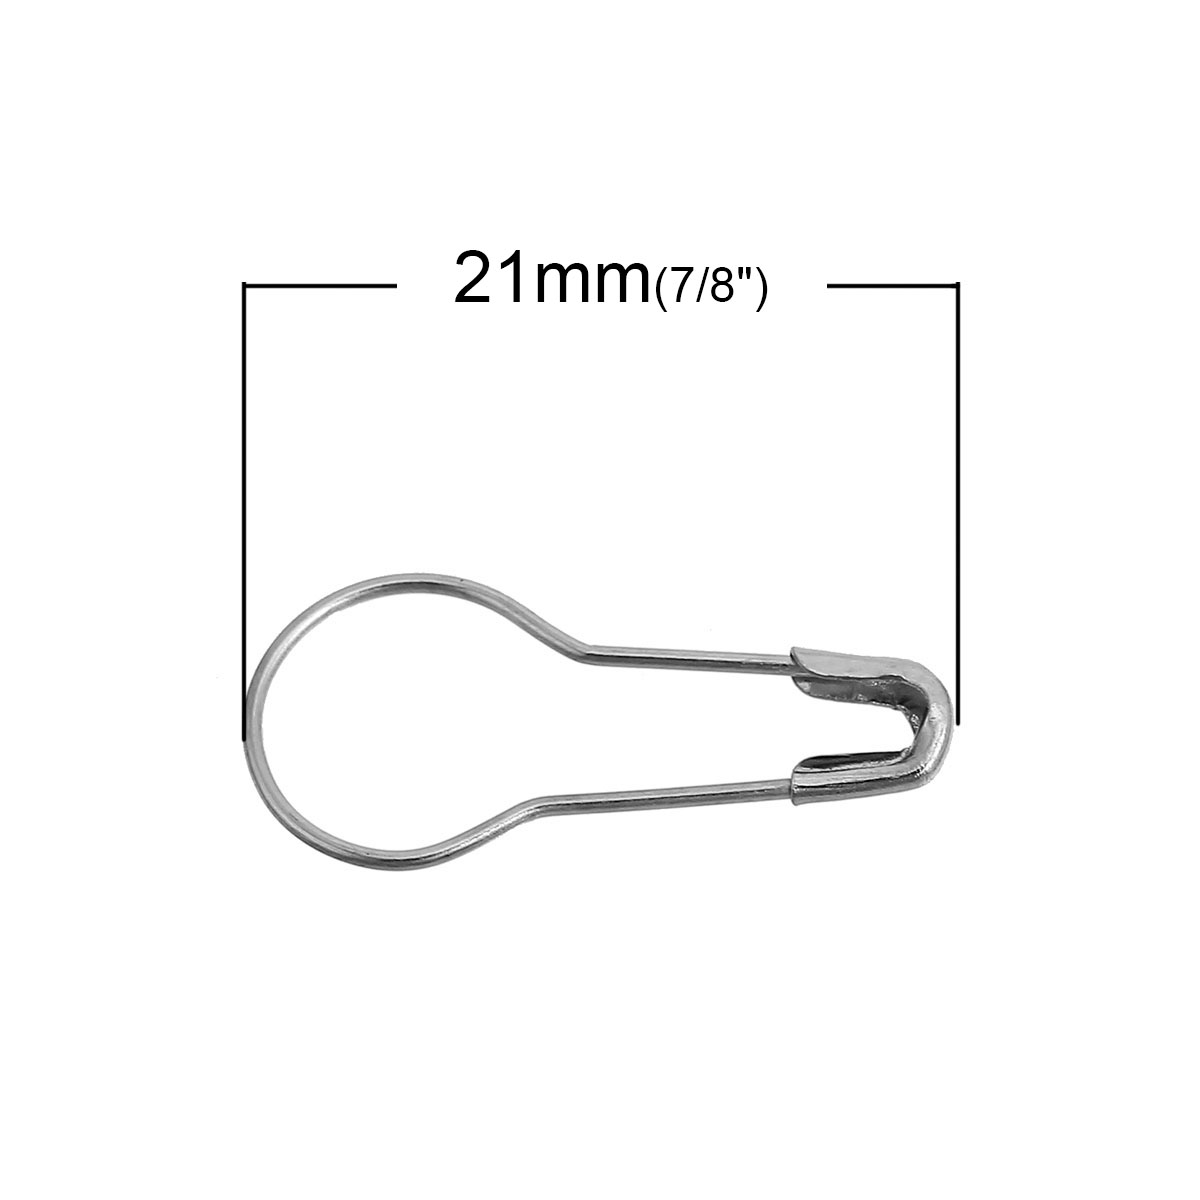 Picture of Iron Based Alloy Safety Pins Brooches Findings Silver Tone 21mm( 7/8") x 9mm( 3/8"), 200 PCs